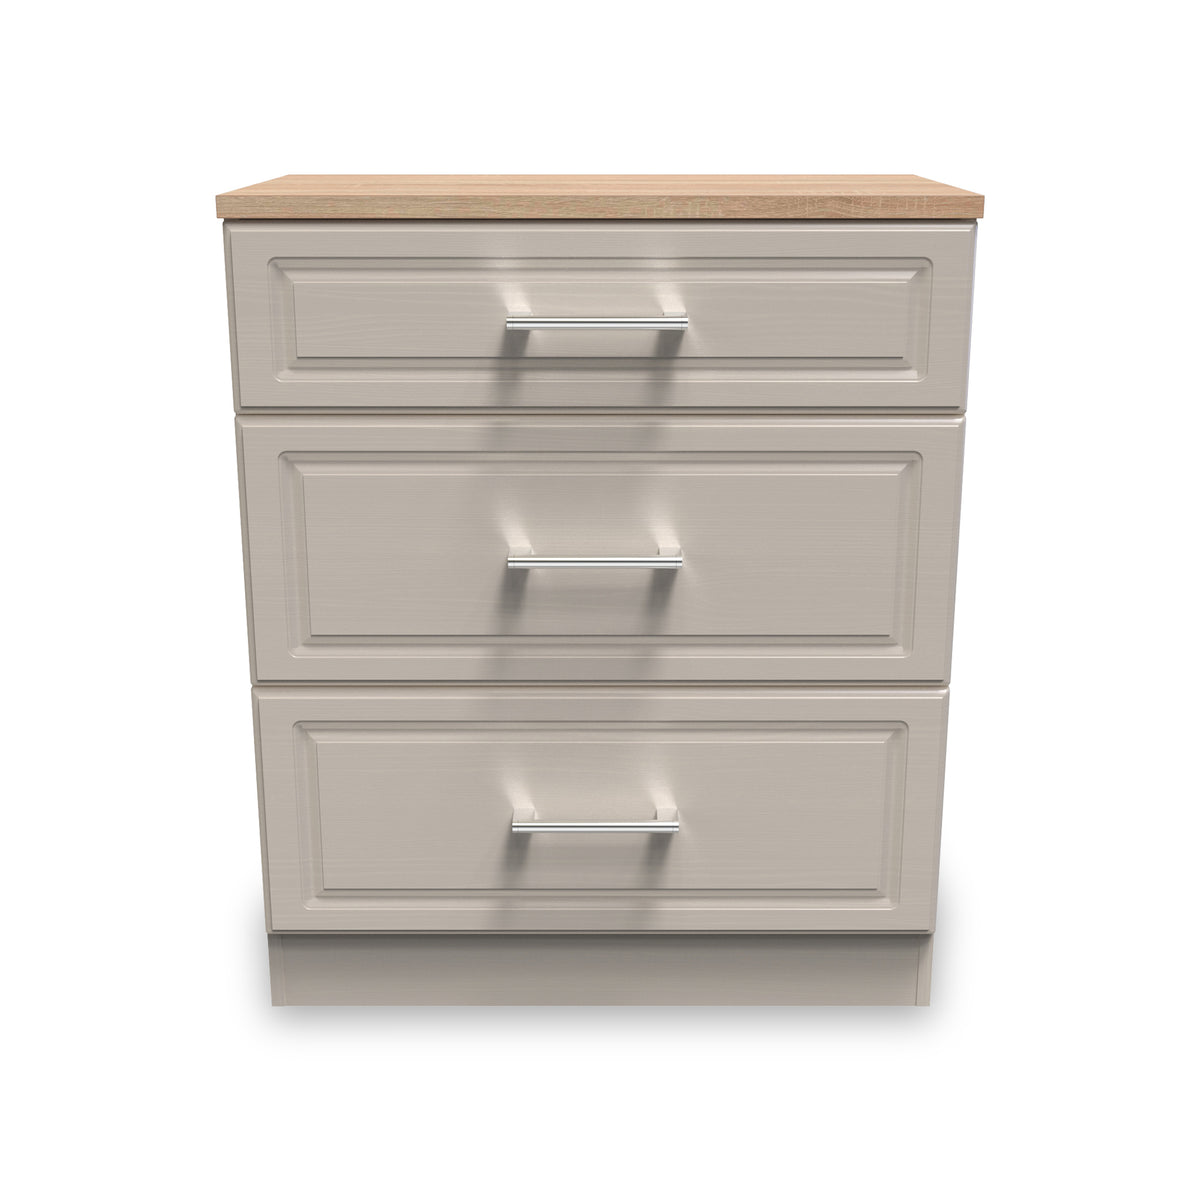 Talland Ash 3 Drawer Deep Chest by Roseland Furniture